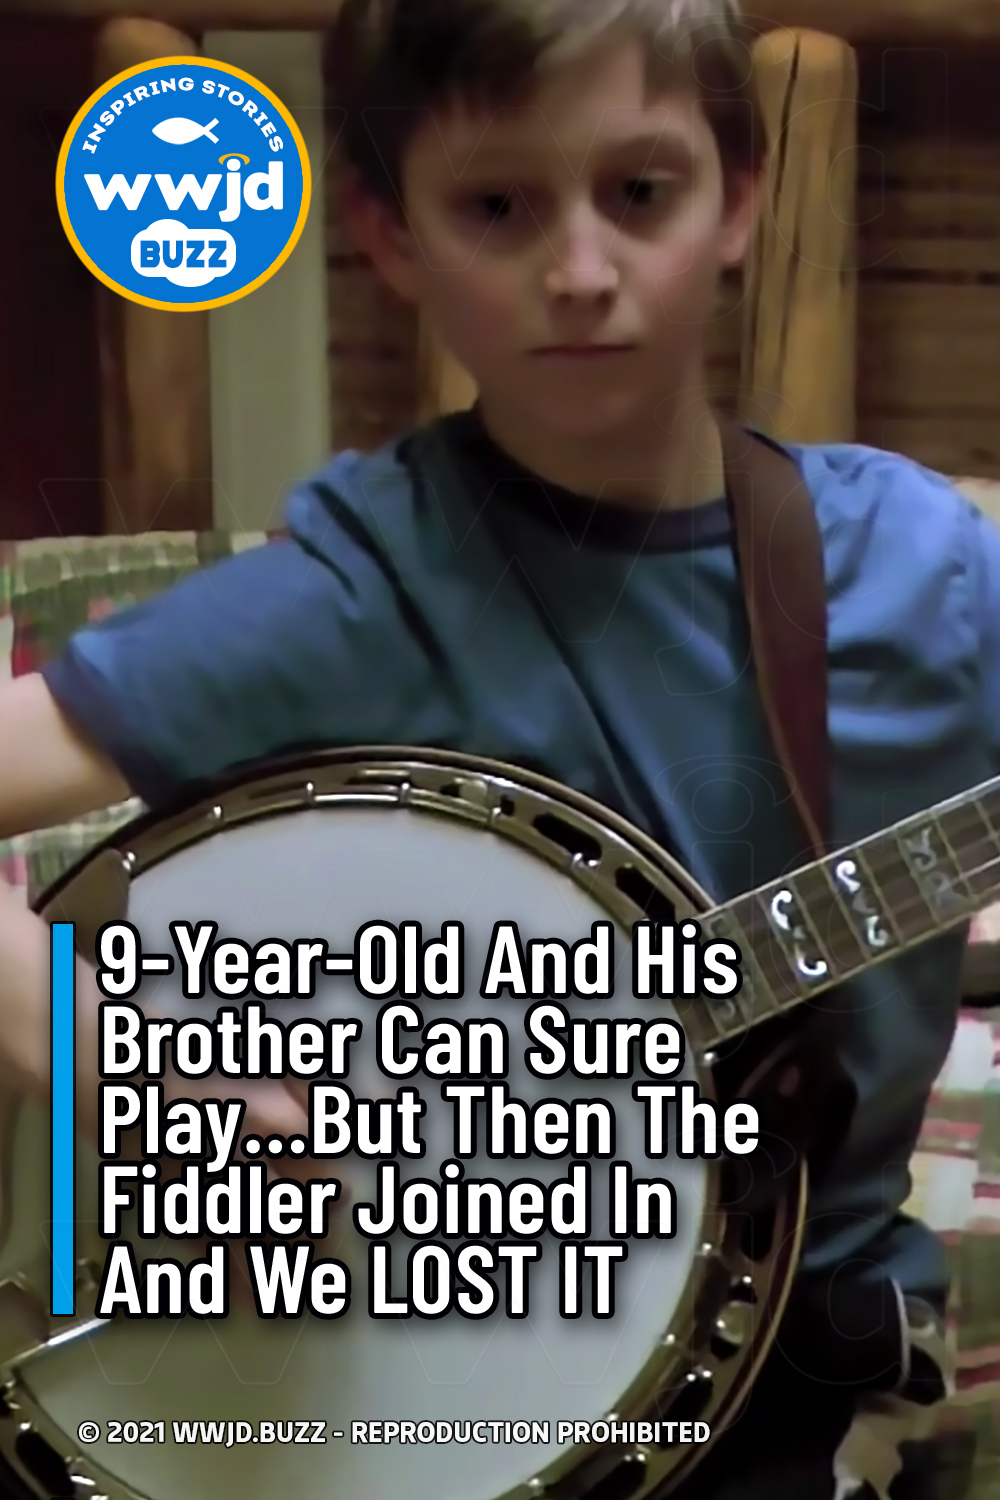 9-Year-Old And His Brother Can Sure Play...But Then The Fiddler Joined In And We LOST IT